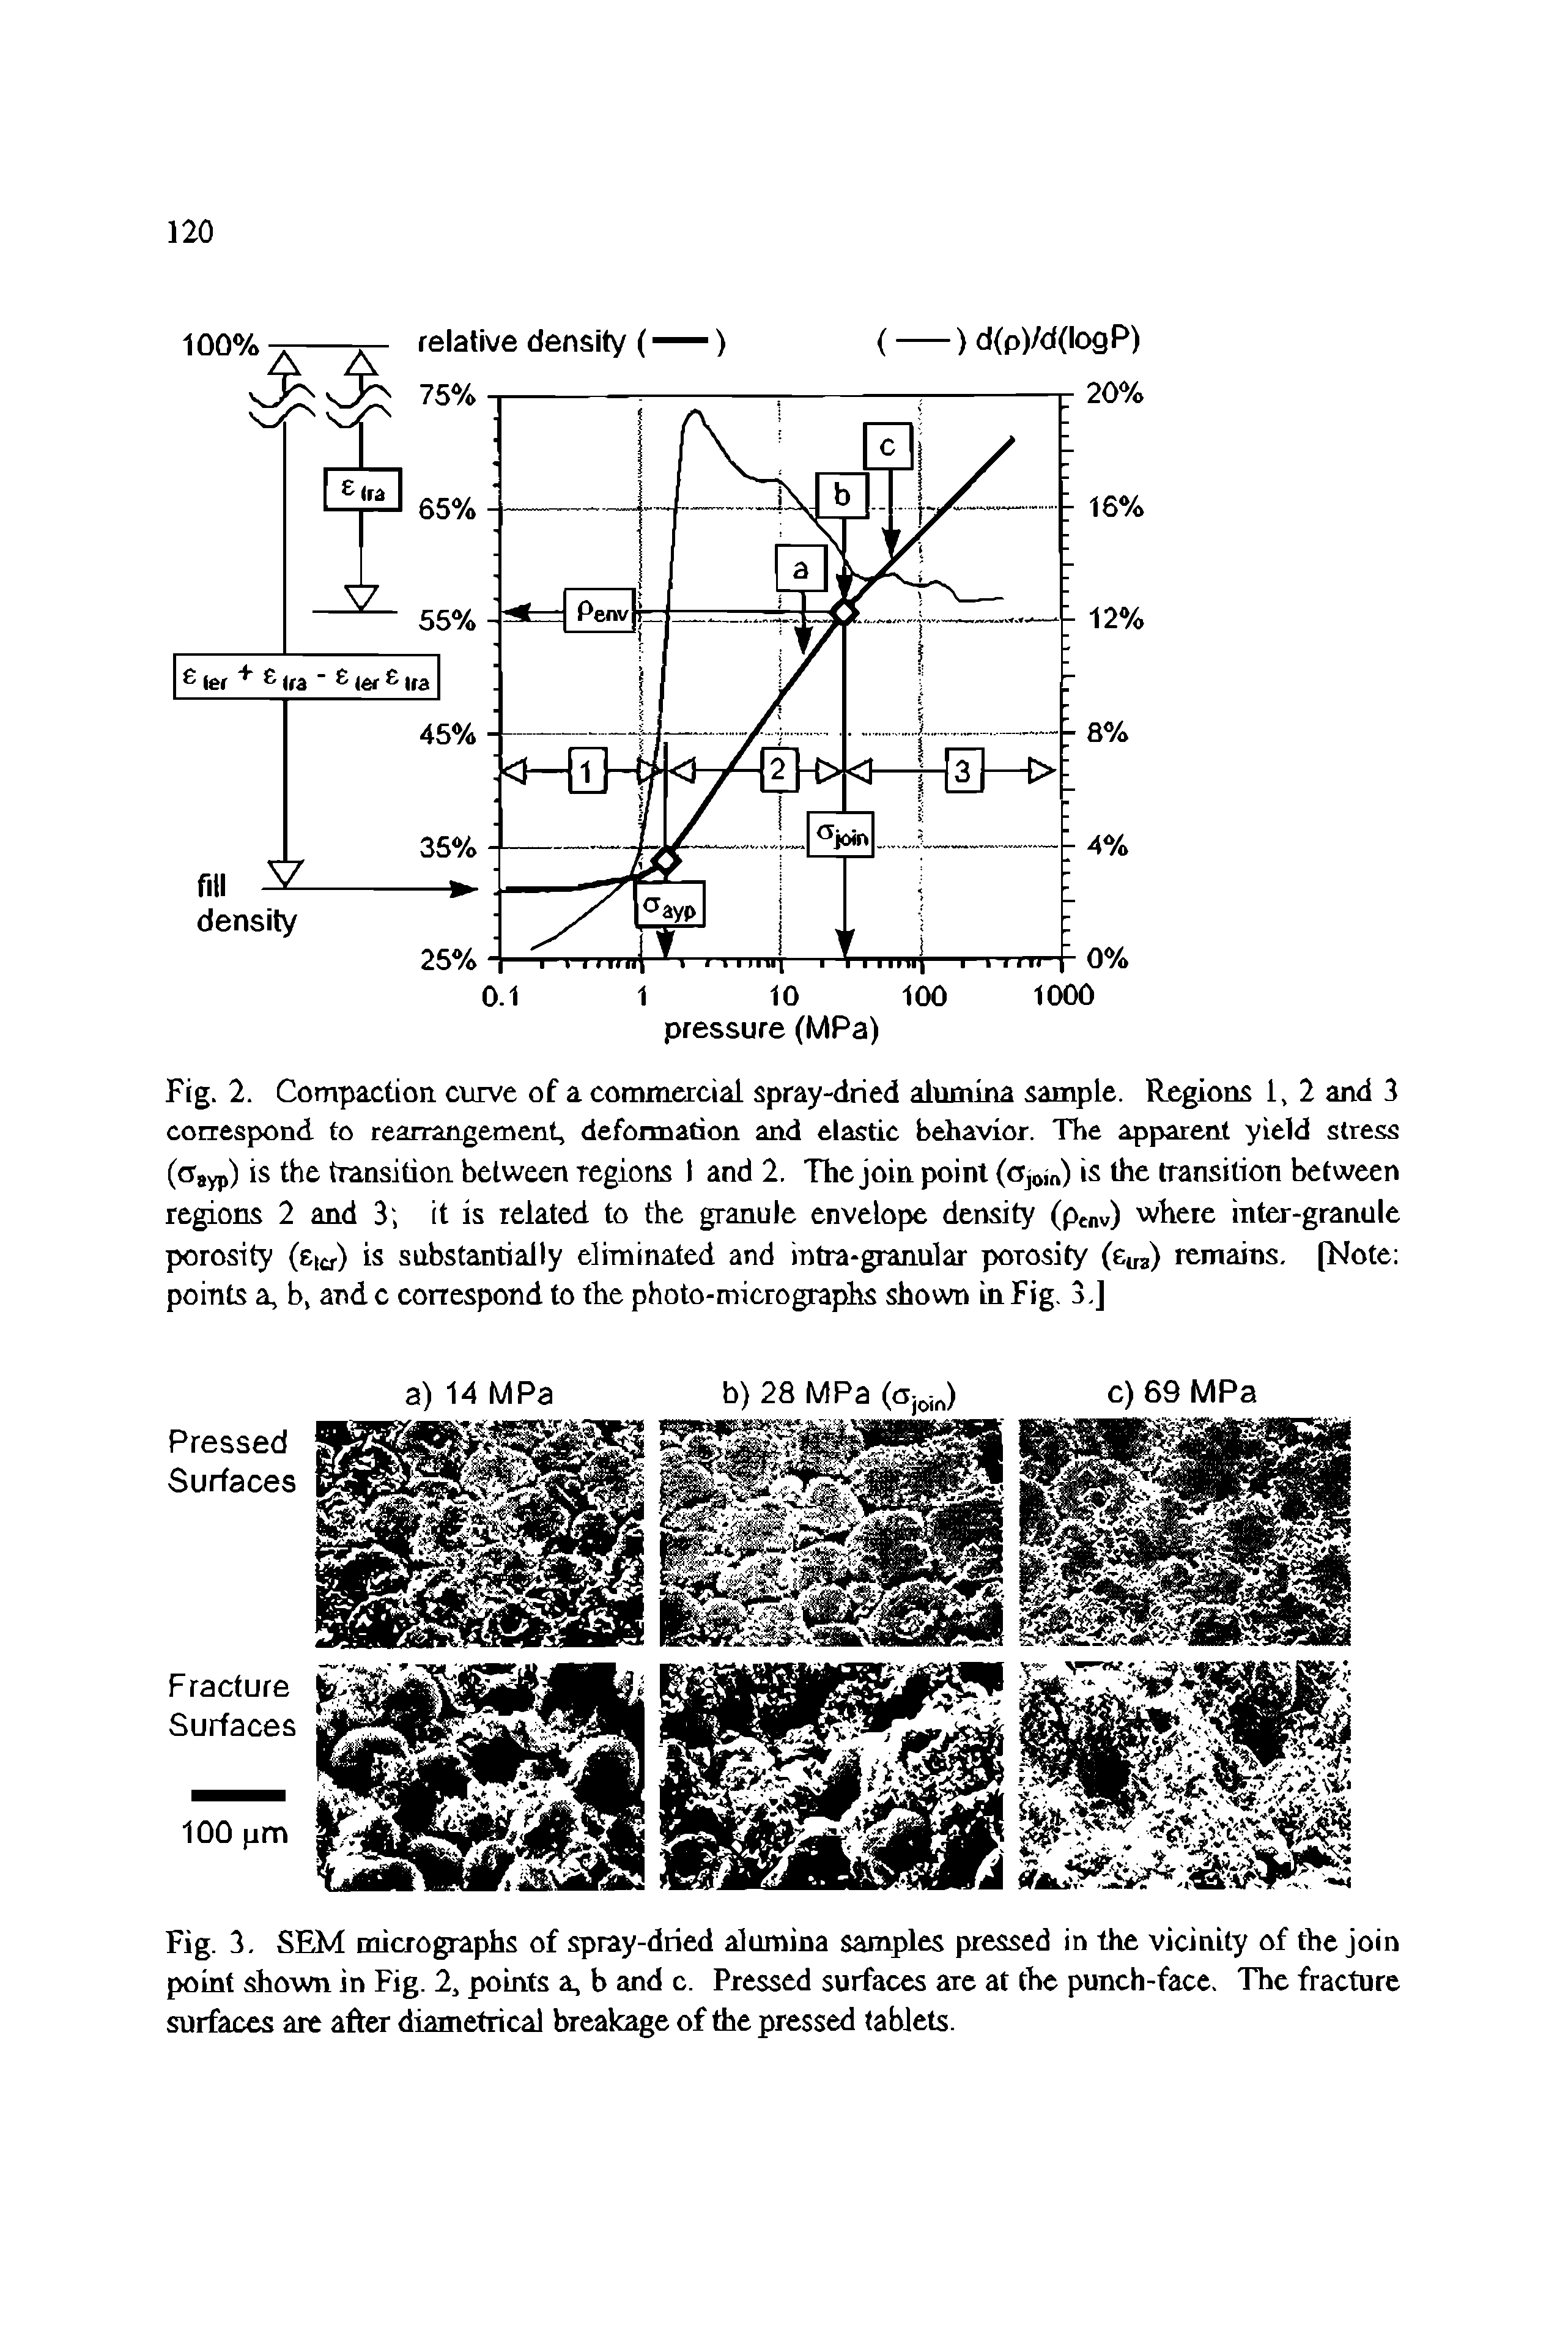 Fig. 2. Compaction, curve of a commercial spray-dried alumina sample. Regions 1, 2 and 3 correspond to rearrangement, deformation and elastic behavior. The apparent yield stress ((Tayp) is the transition between regions t and 2. The join point (Ojom) is the transition between regions 2 and 3 it is related to the granule envelope density (penv) where inter-granule porosity (eict) is substantially eliminated and intra-granular porosity (eua) remains, (Note points a, b, and c correspond to the photo-micrographs shown in Fig. 3,]...